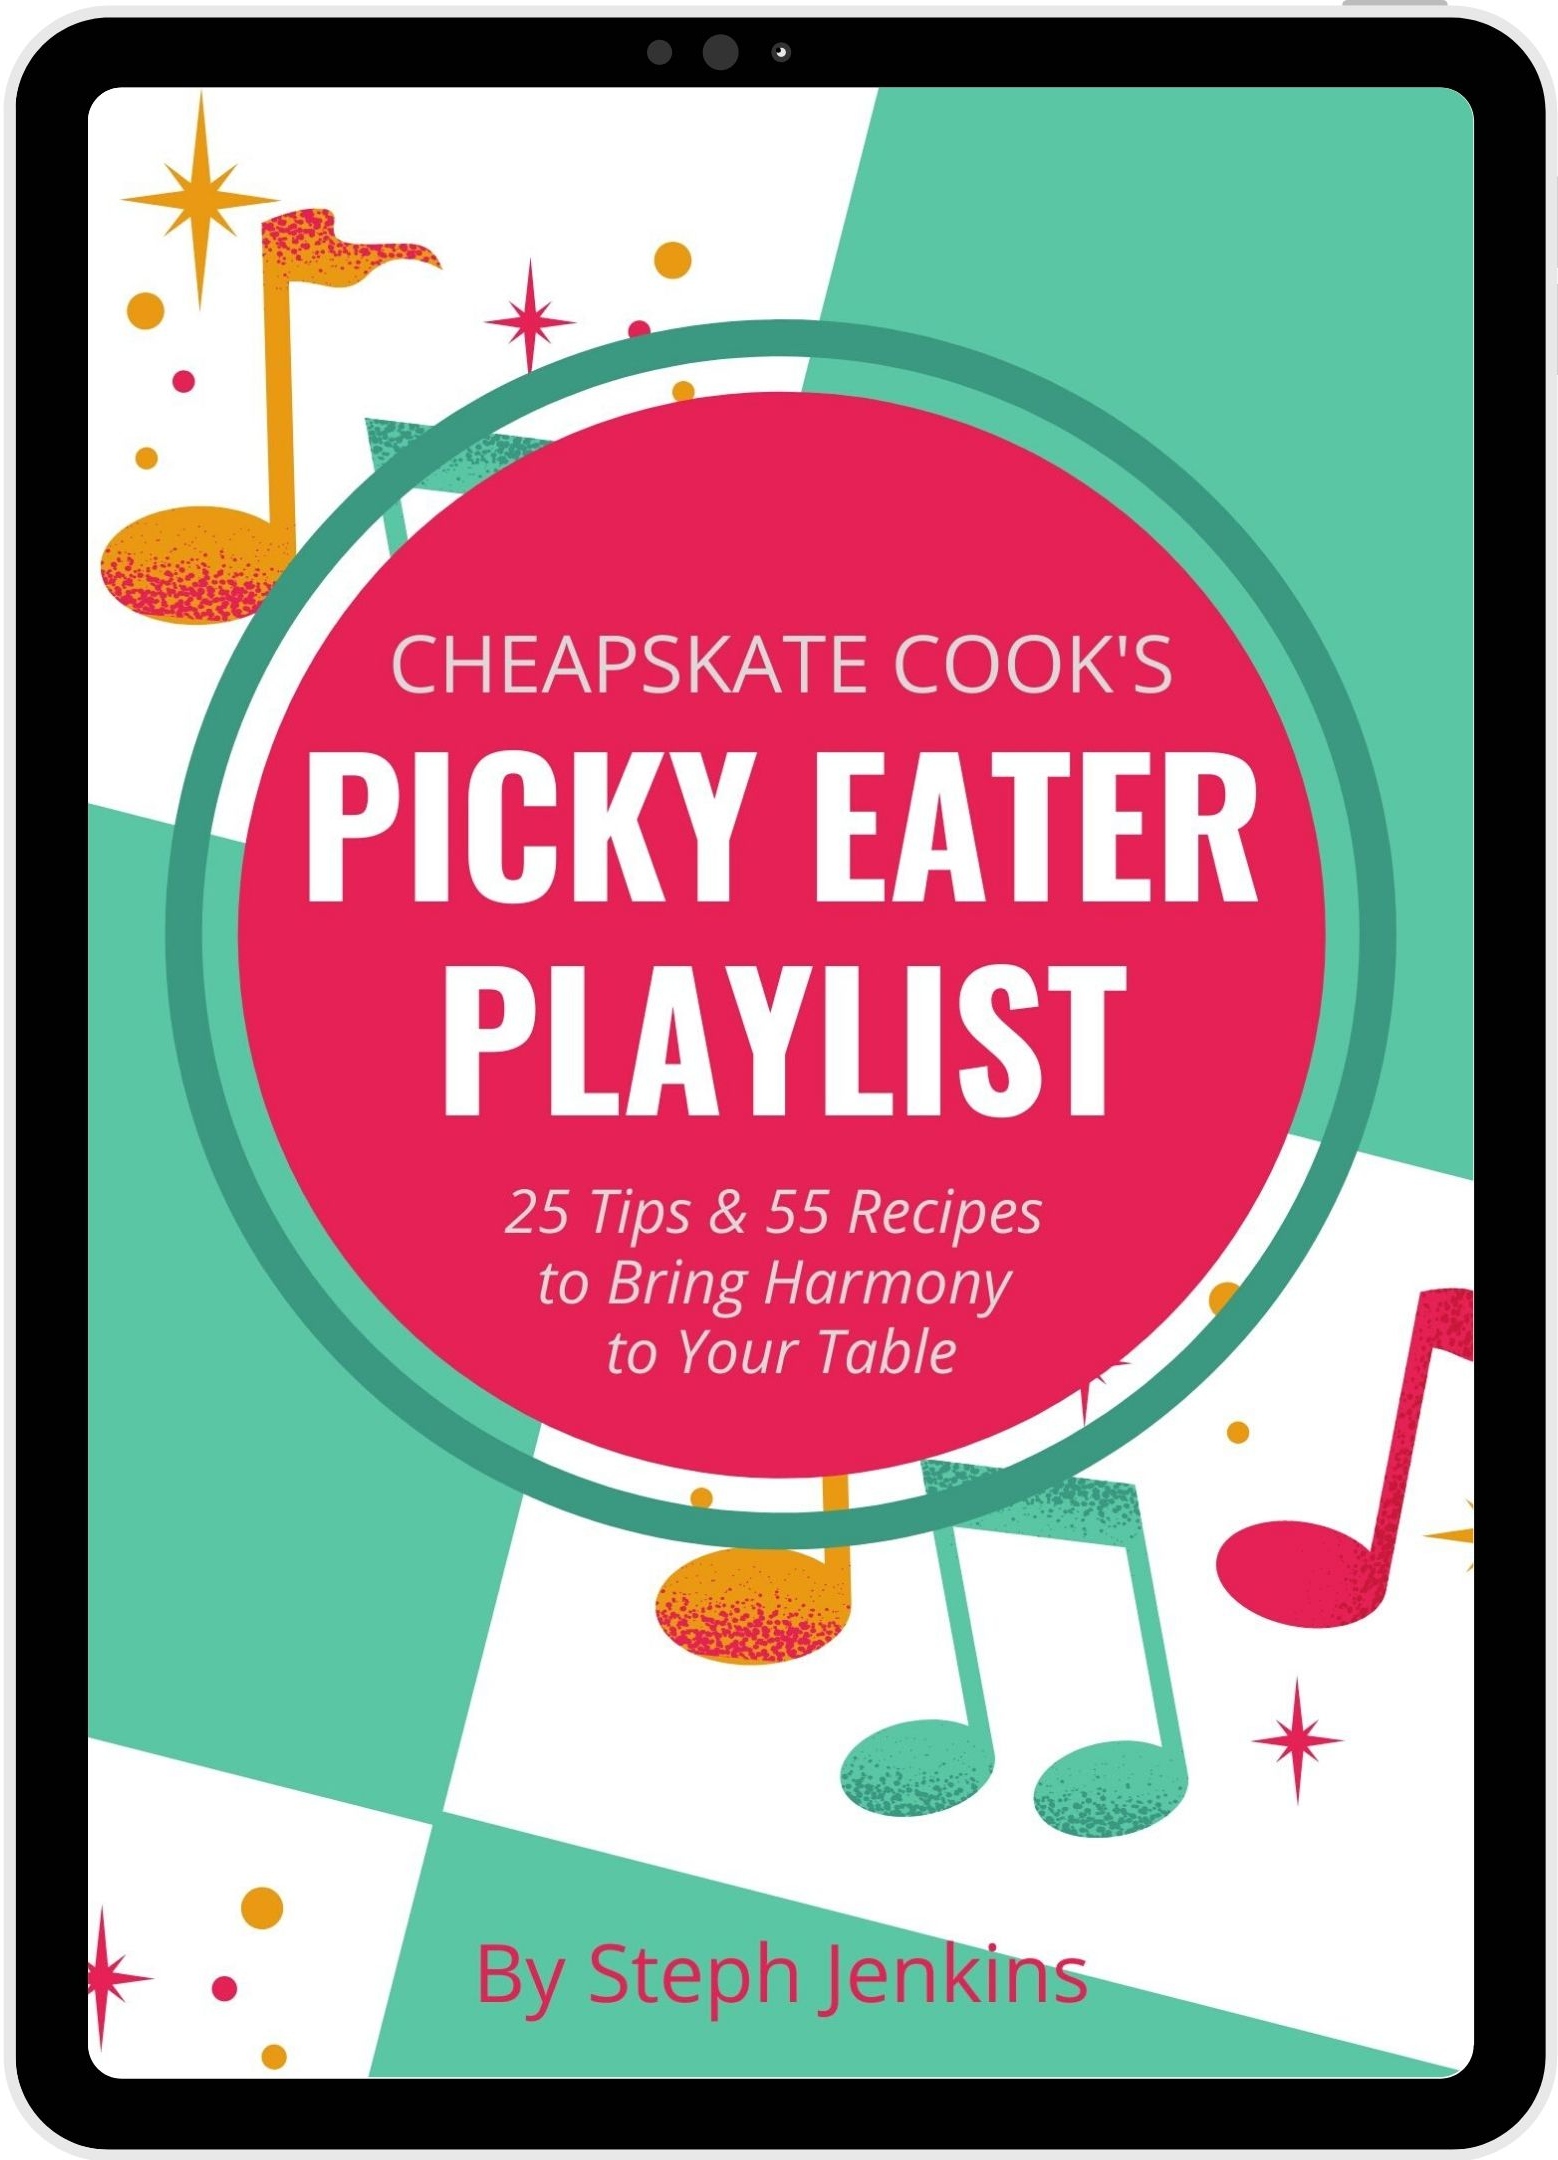 Picky Eater Playlist eBook - full of picky eater meals